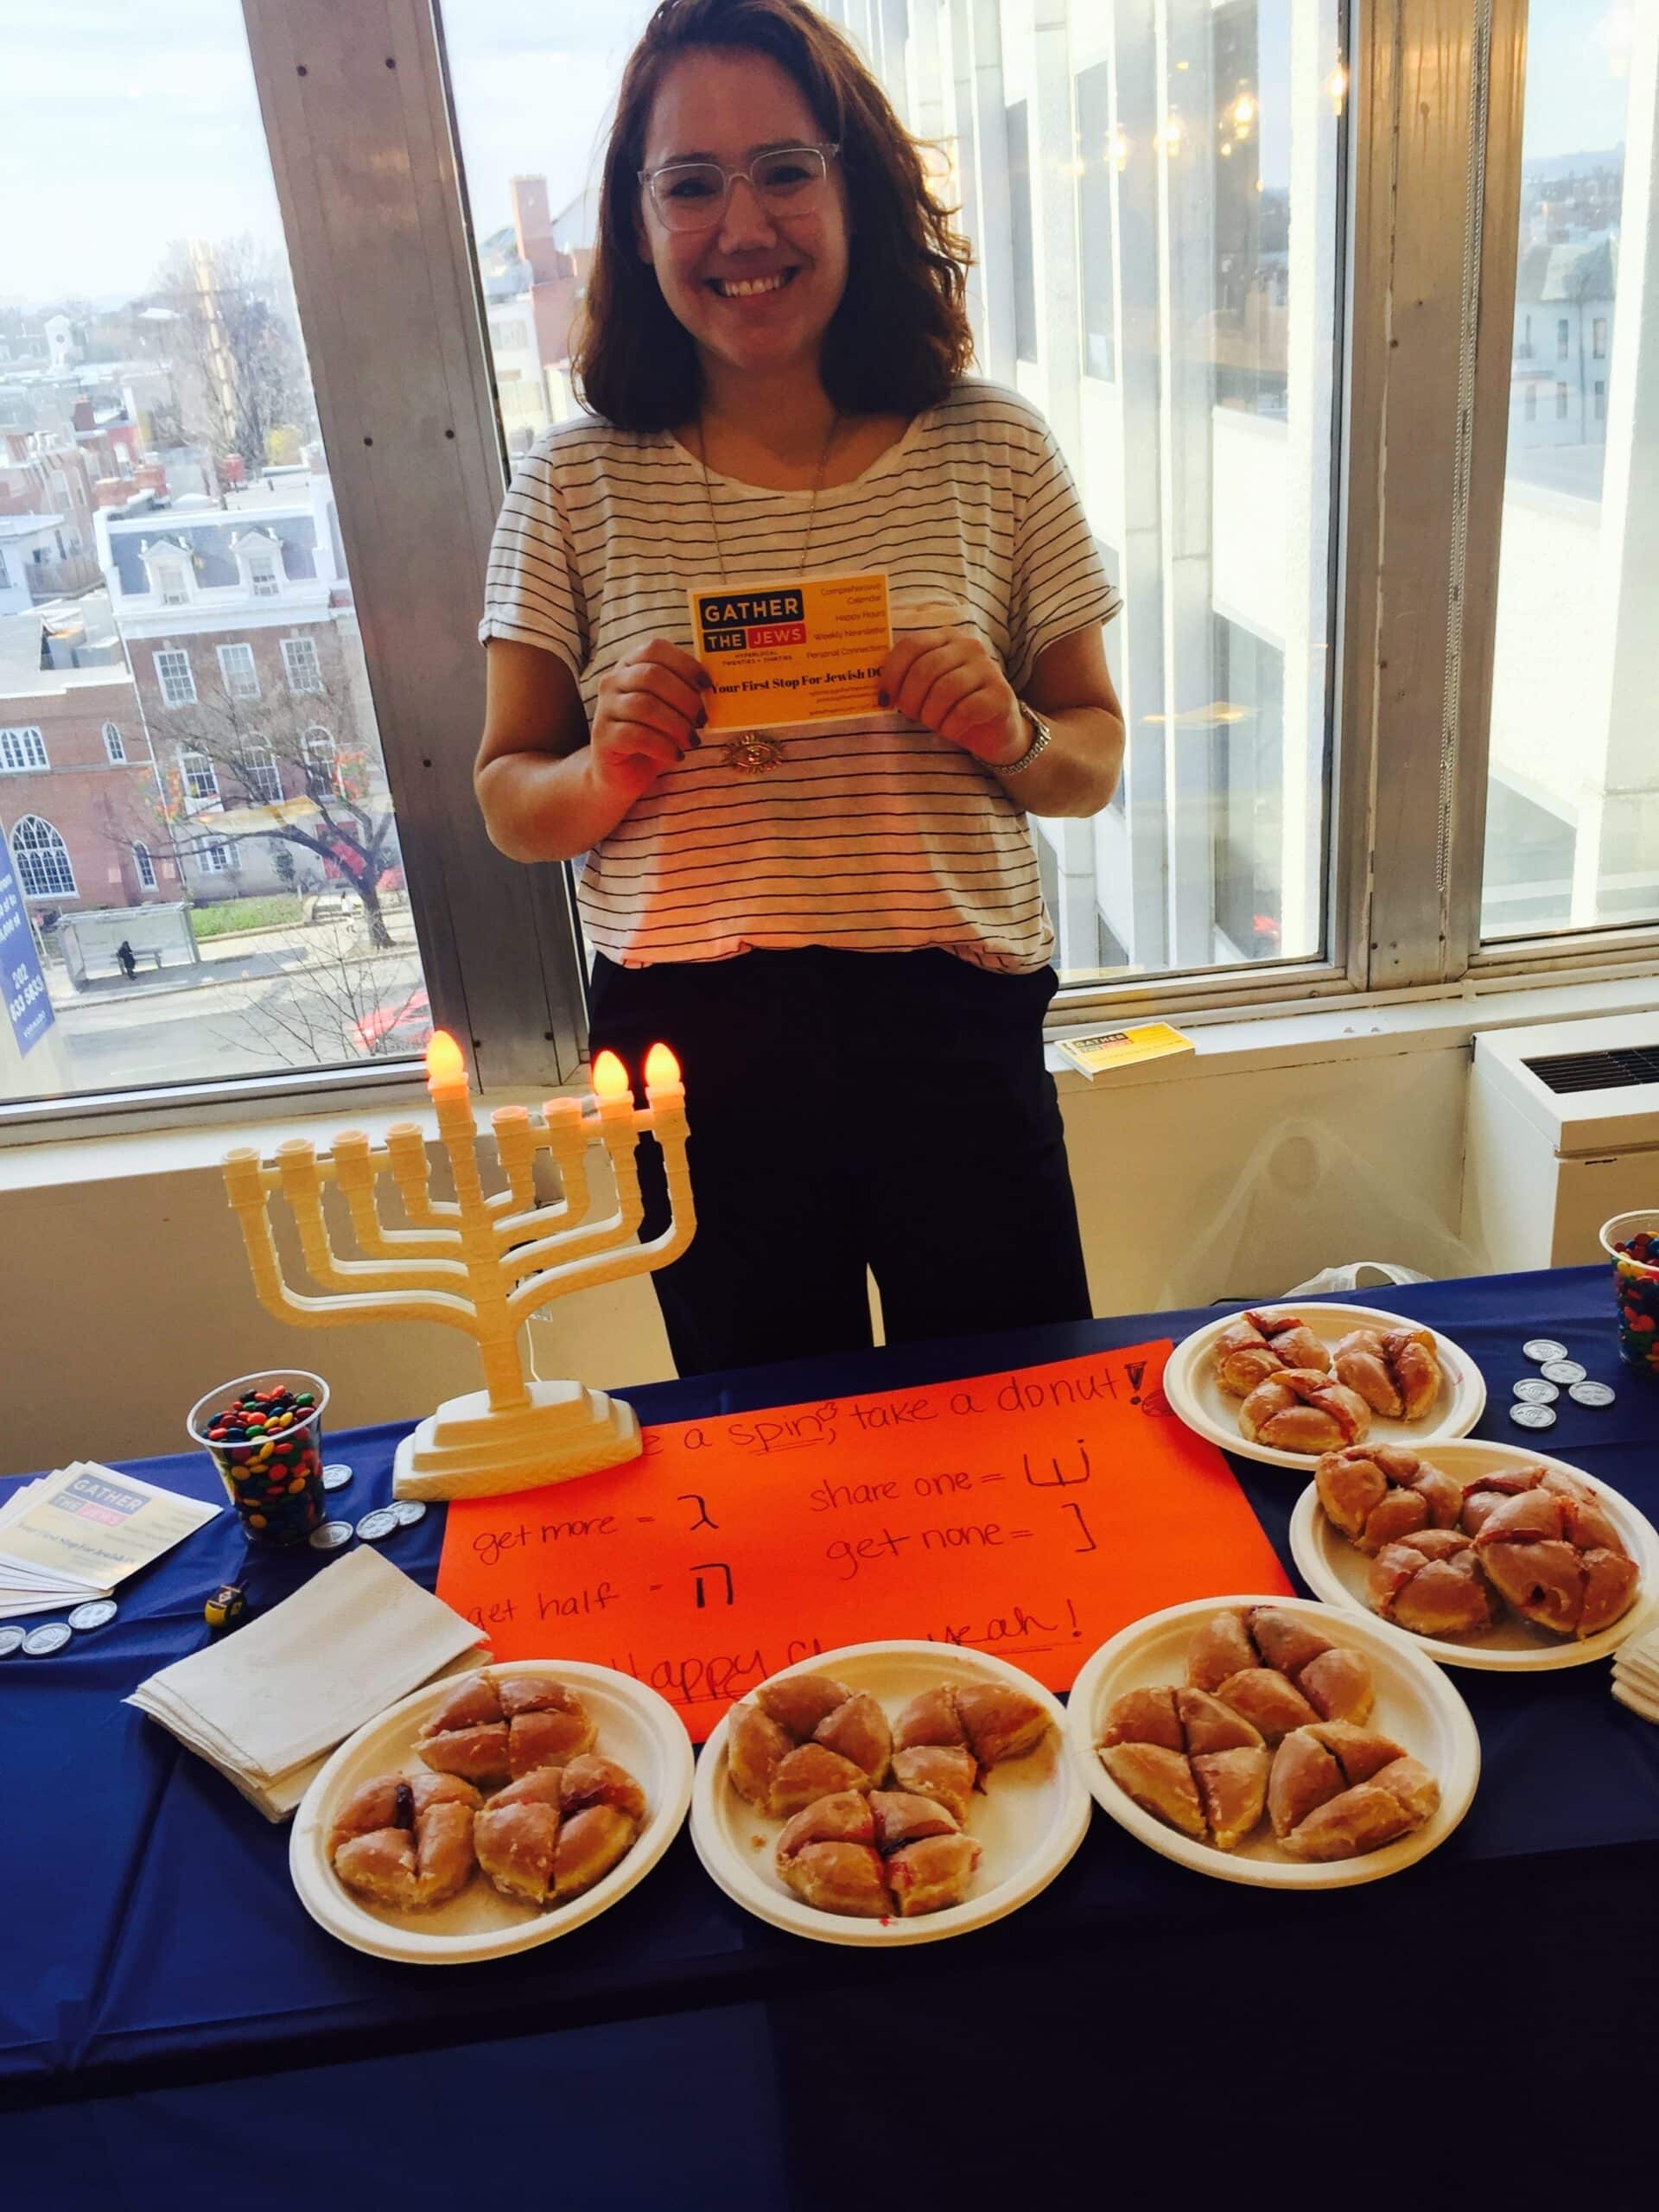 Jackie stands behind a table at a Gather event, fronted by a menorah, an orange sign, and plates of food. 